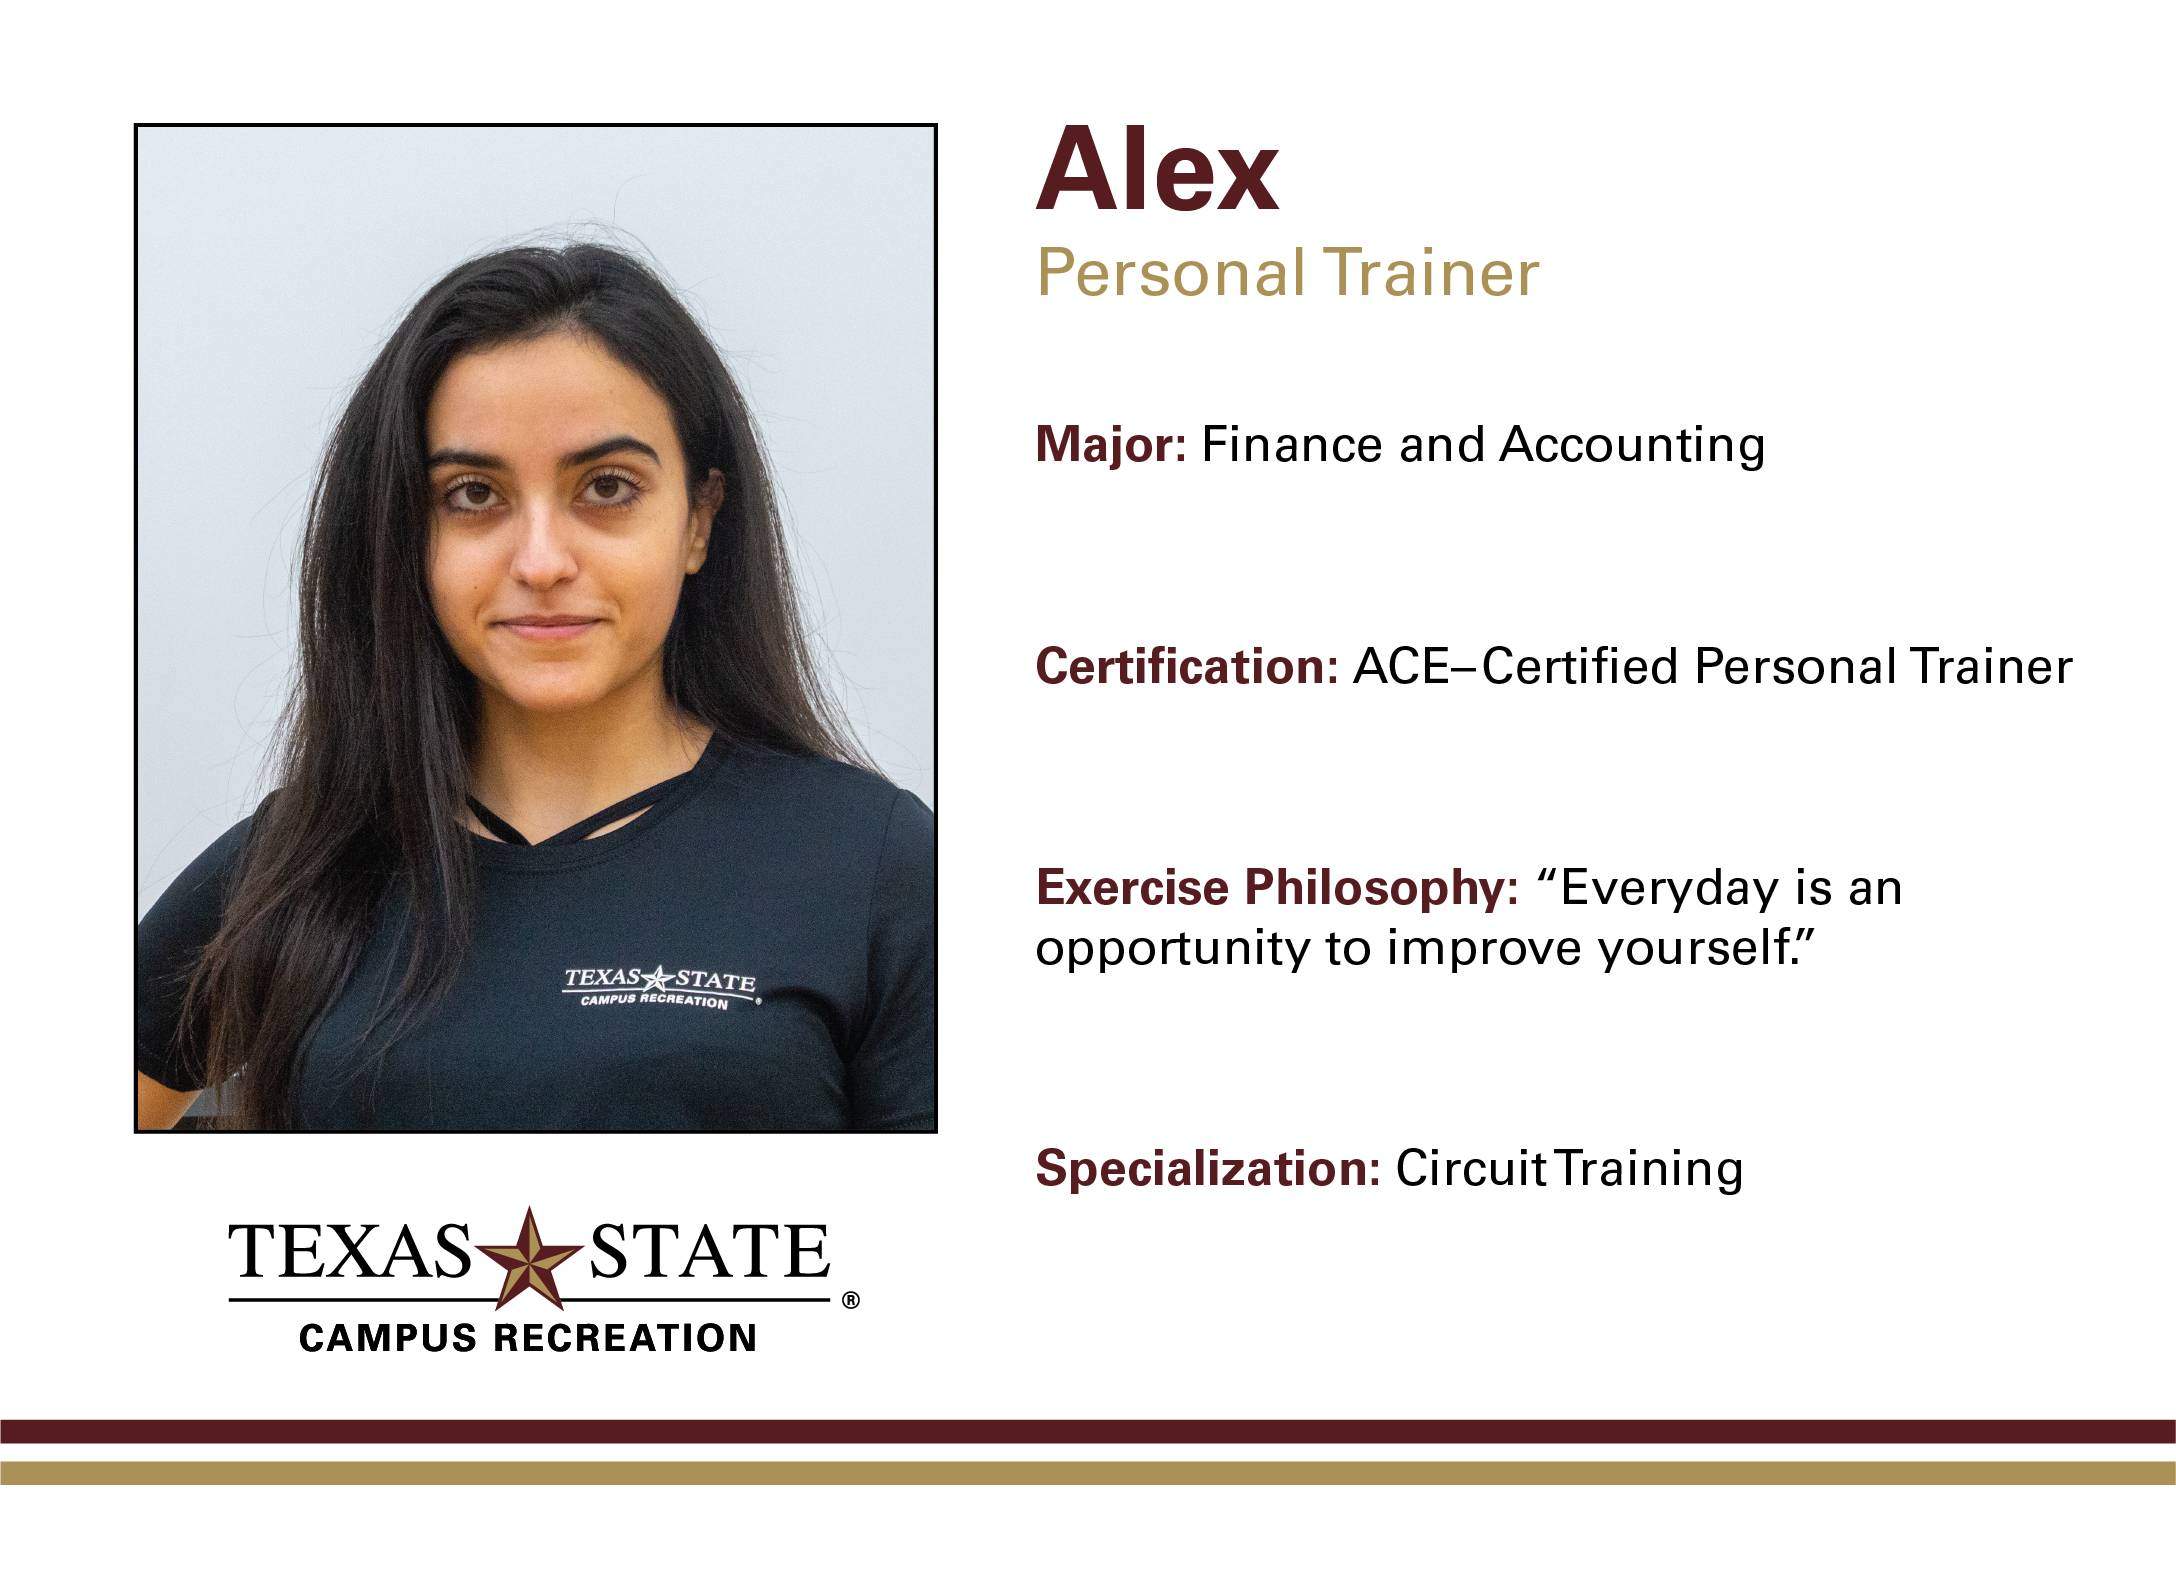 A bio of Alex one of the SRC trainers